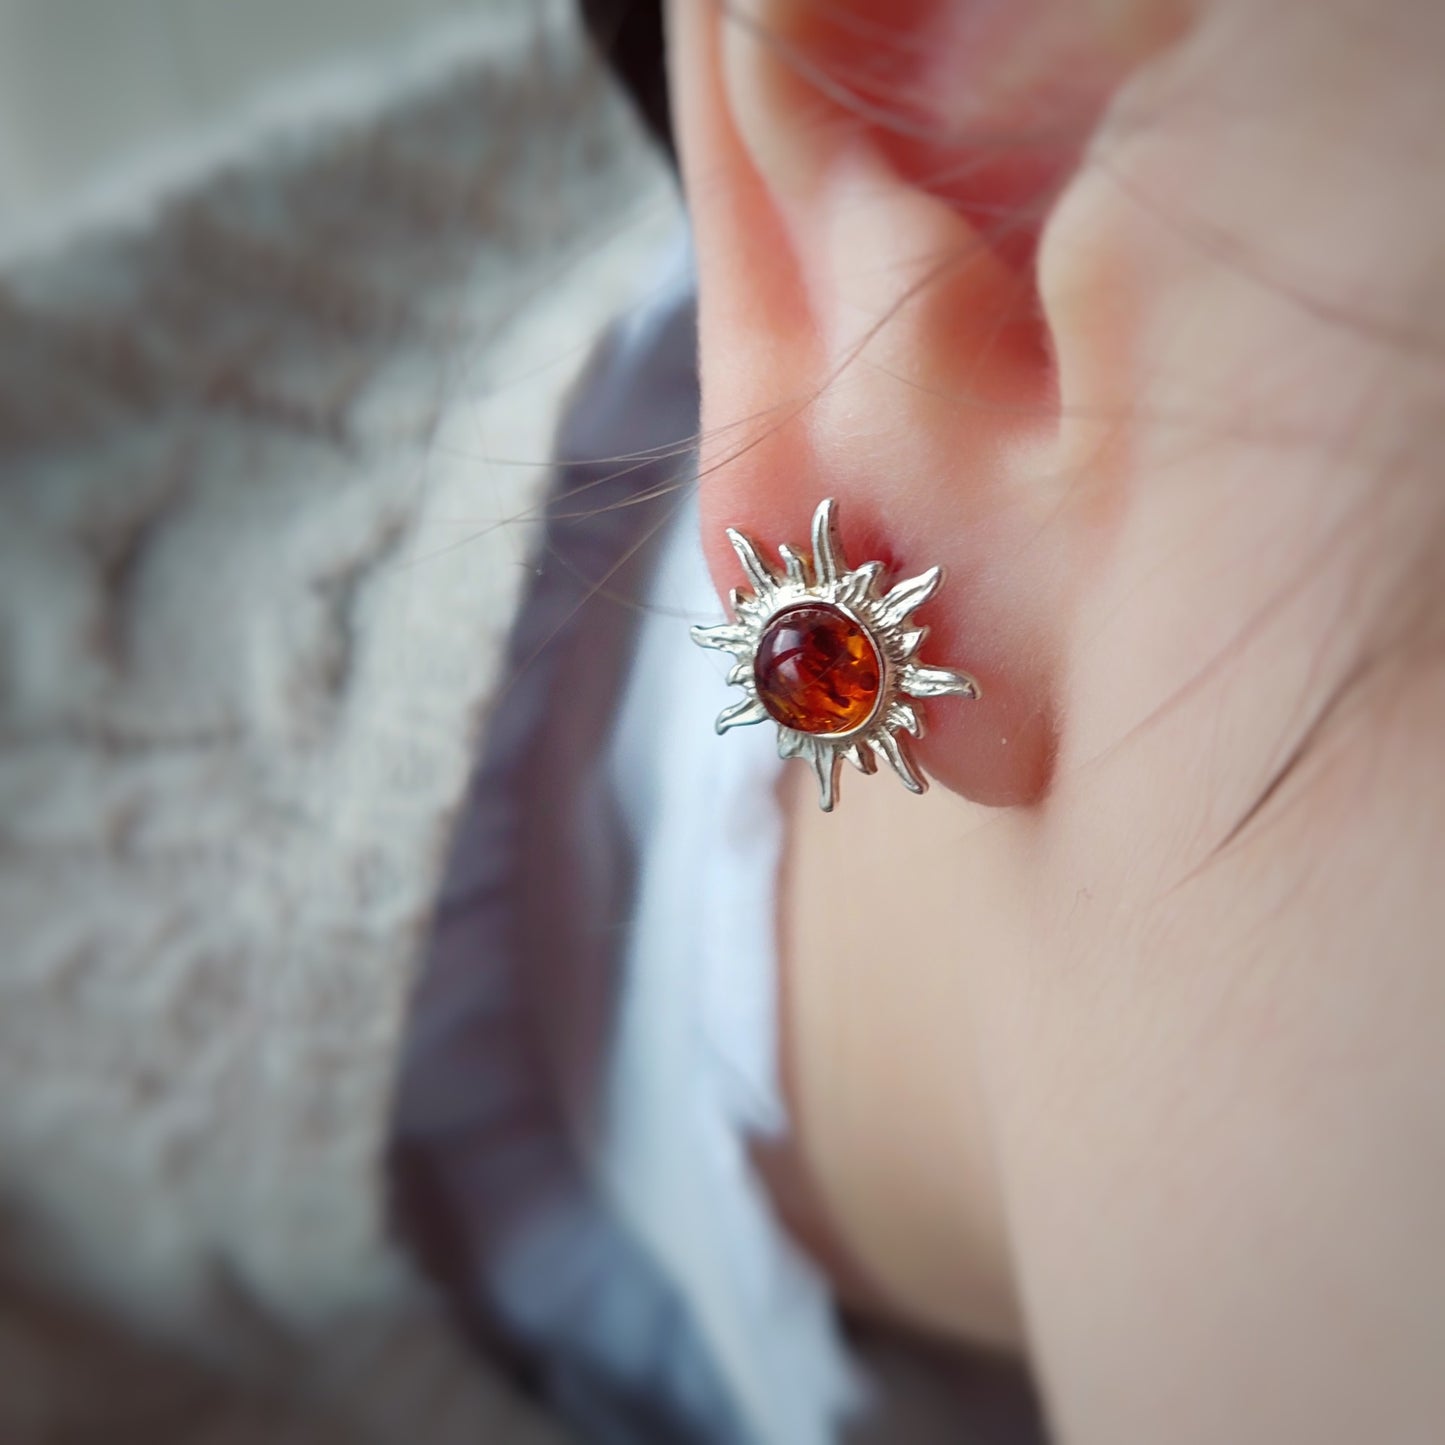 Suns with amber stud earrings, Silver Sun Earrings, Boho earrings stud, Sun shape silver studs